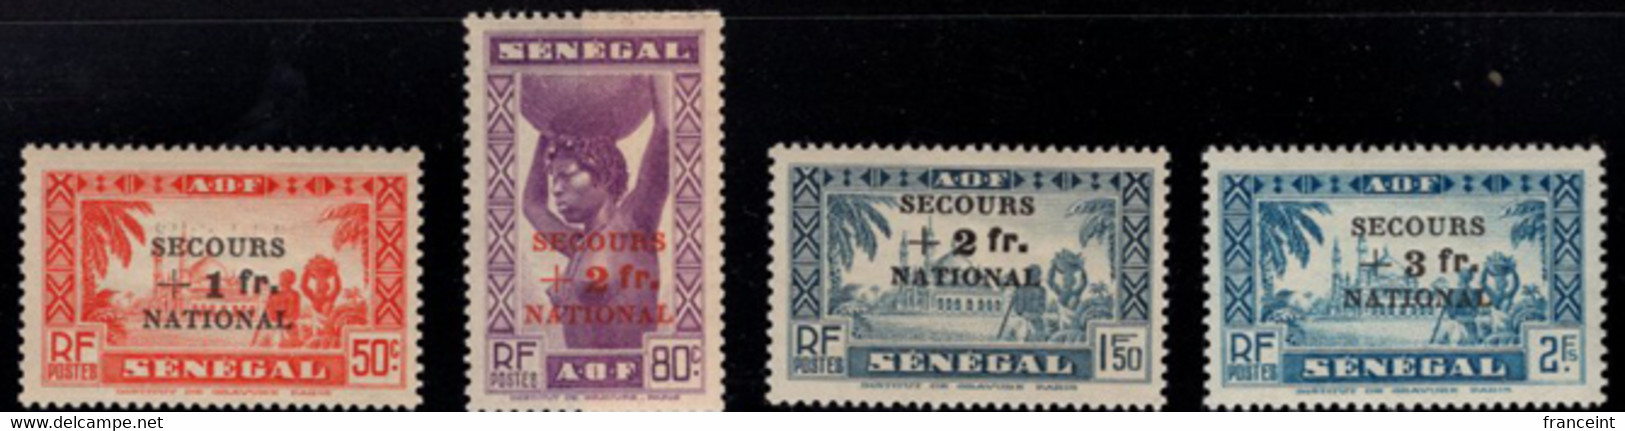 French Colonies (1941) Secours National SENEGAL. Complete Set MNH. Scott Nos B9-12. - 1941 Secours National